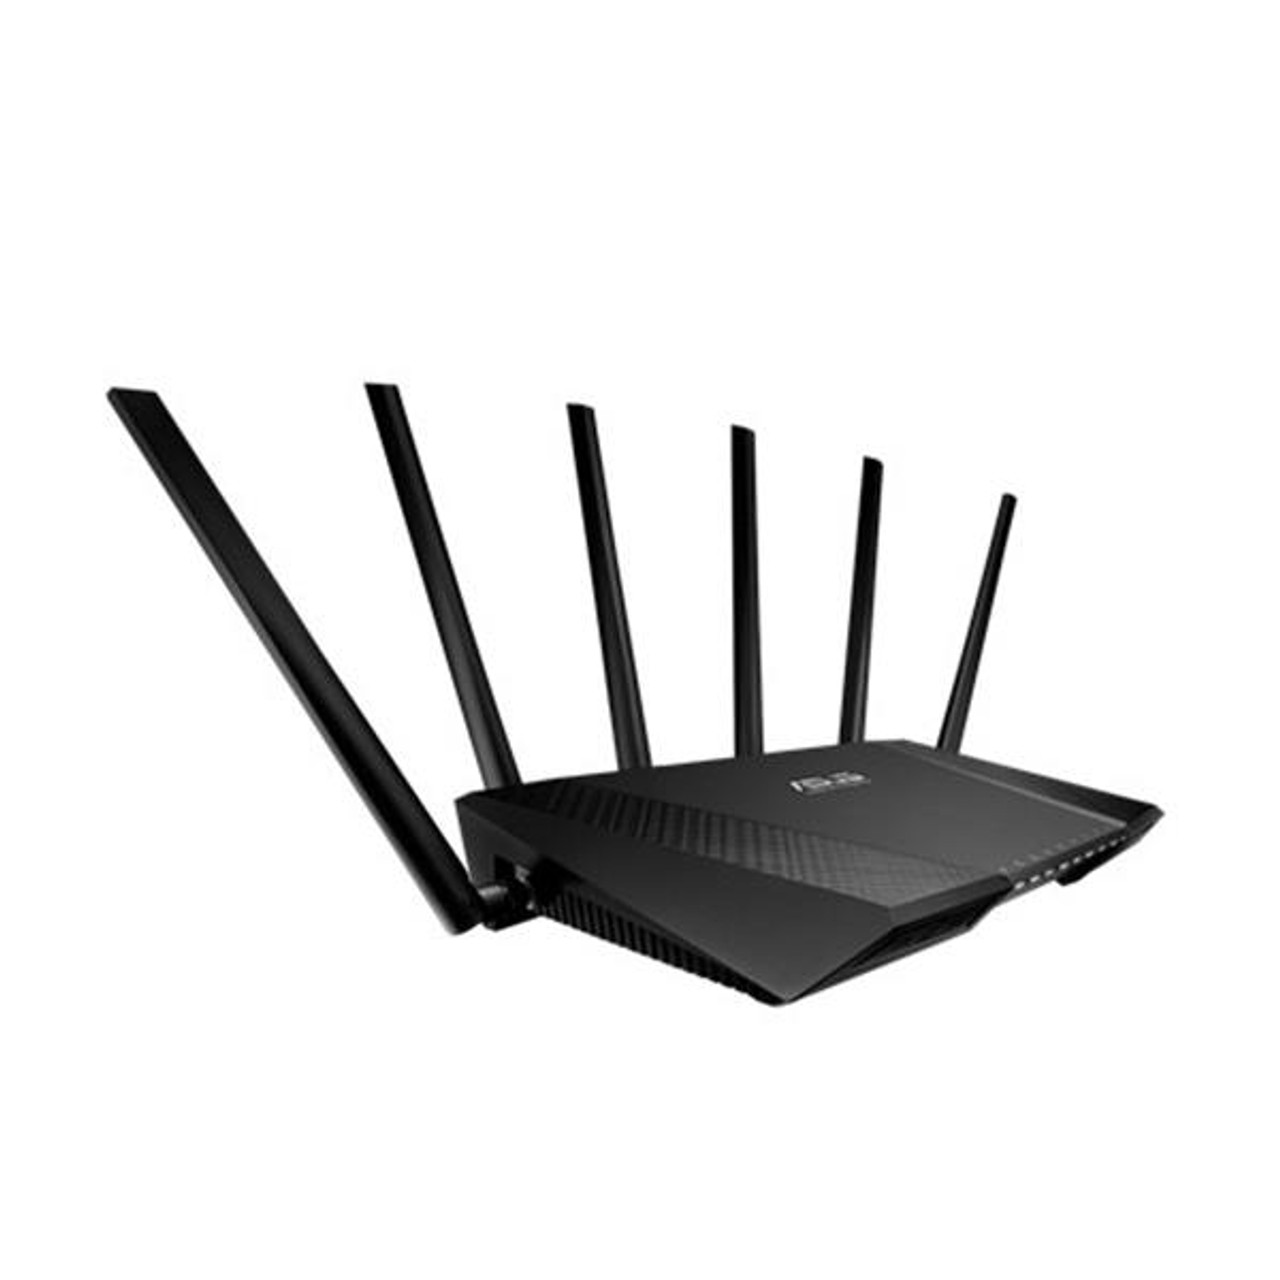 90IG01F1-BA1G00 Asus RT-AC3200 Tri-band Wireless-AC3200 4-Ports Gigabit Gaming Router with AiProtection Powered by Trend Micro (Refurbished)